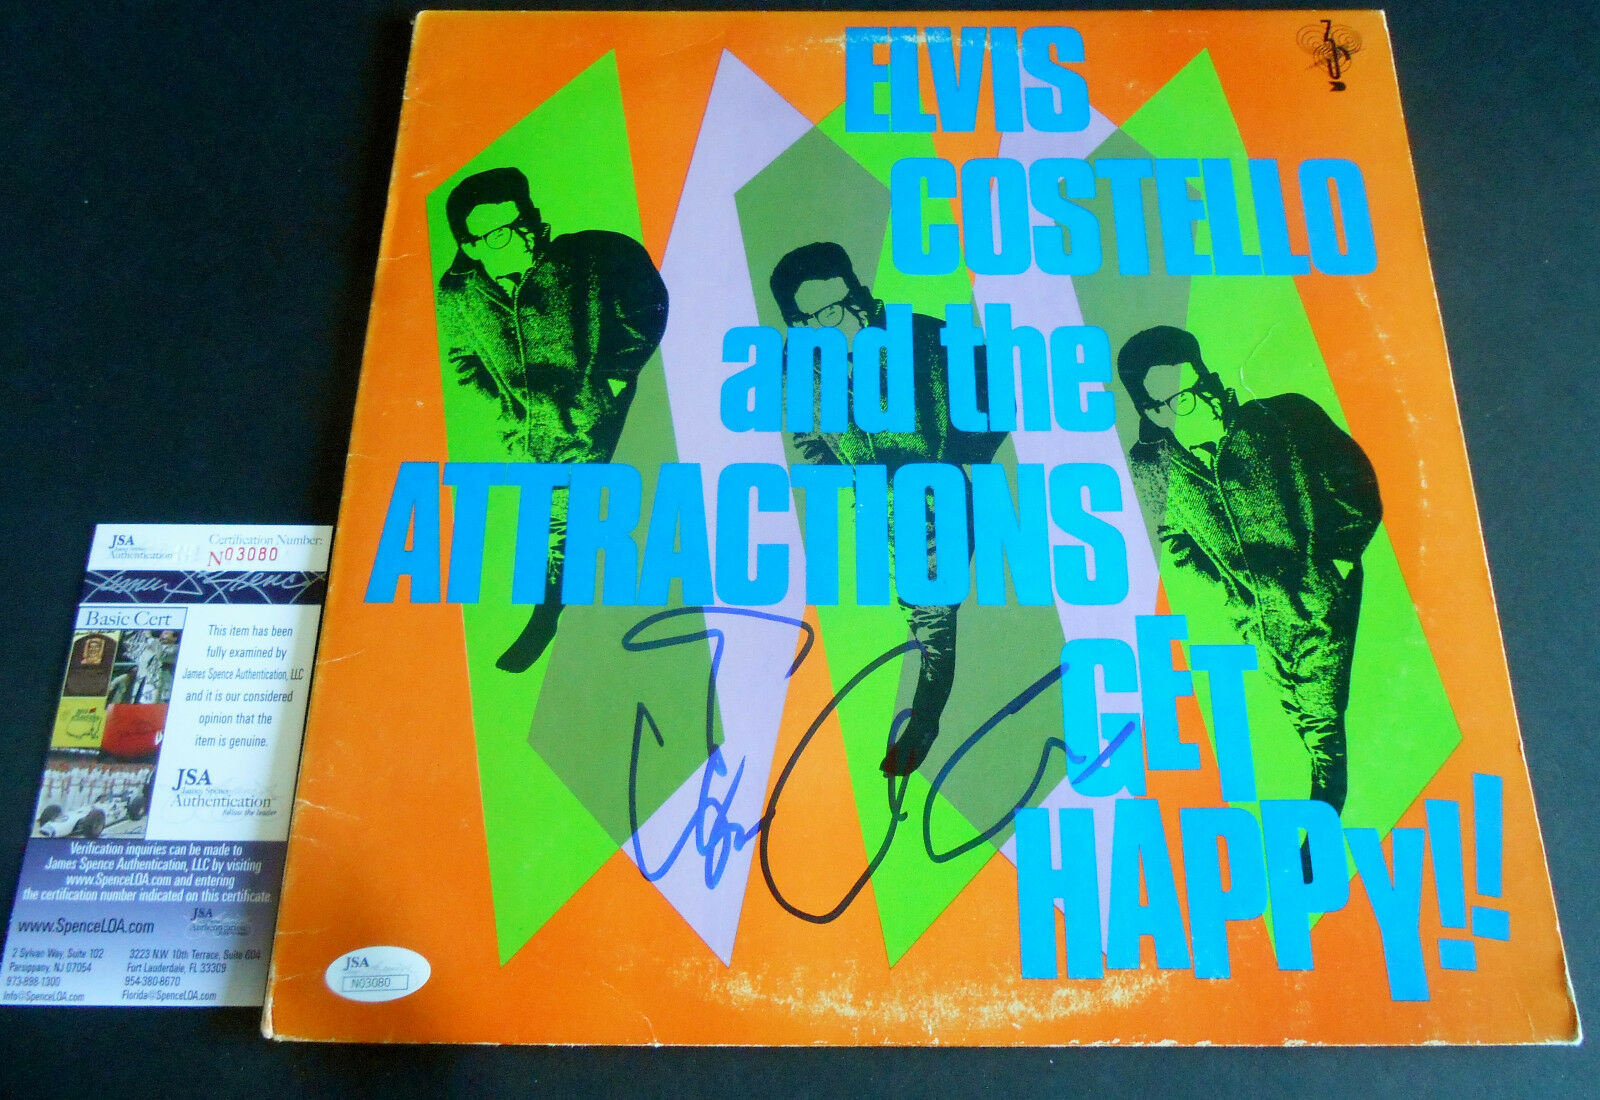 Elvis Costello Signed Record Album Cover W Jsa Coa The Attractions Get Happy Collectible